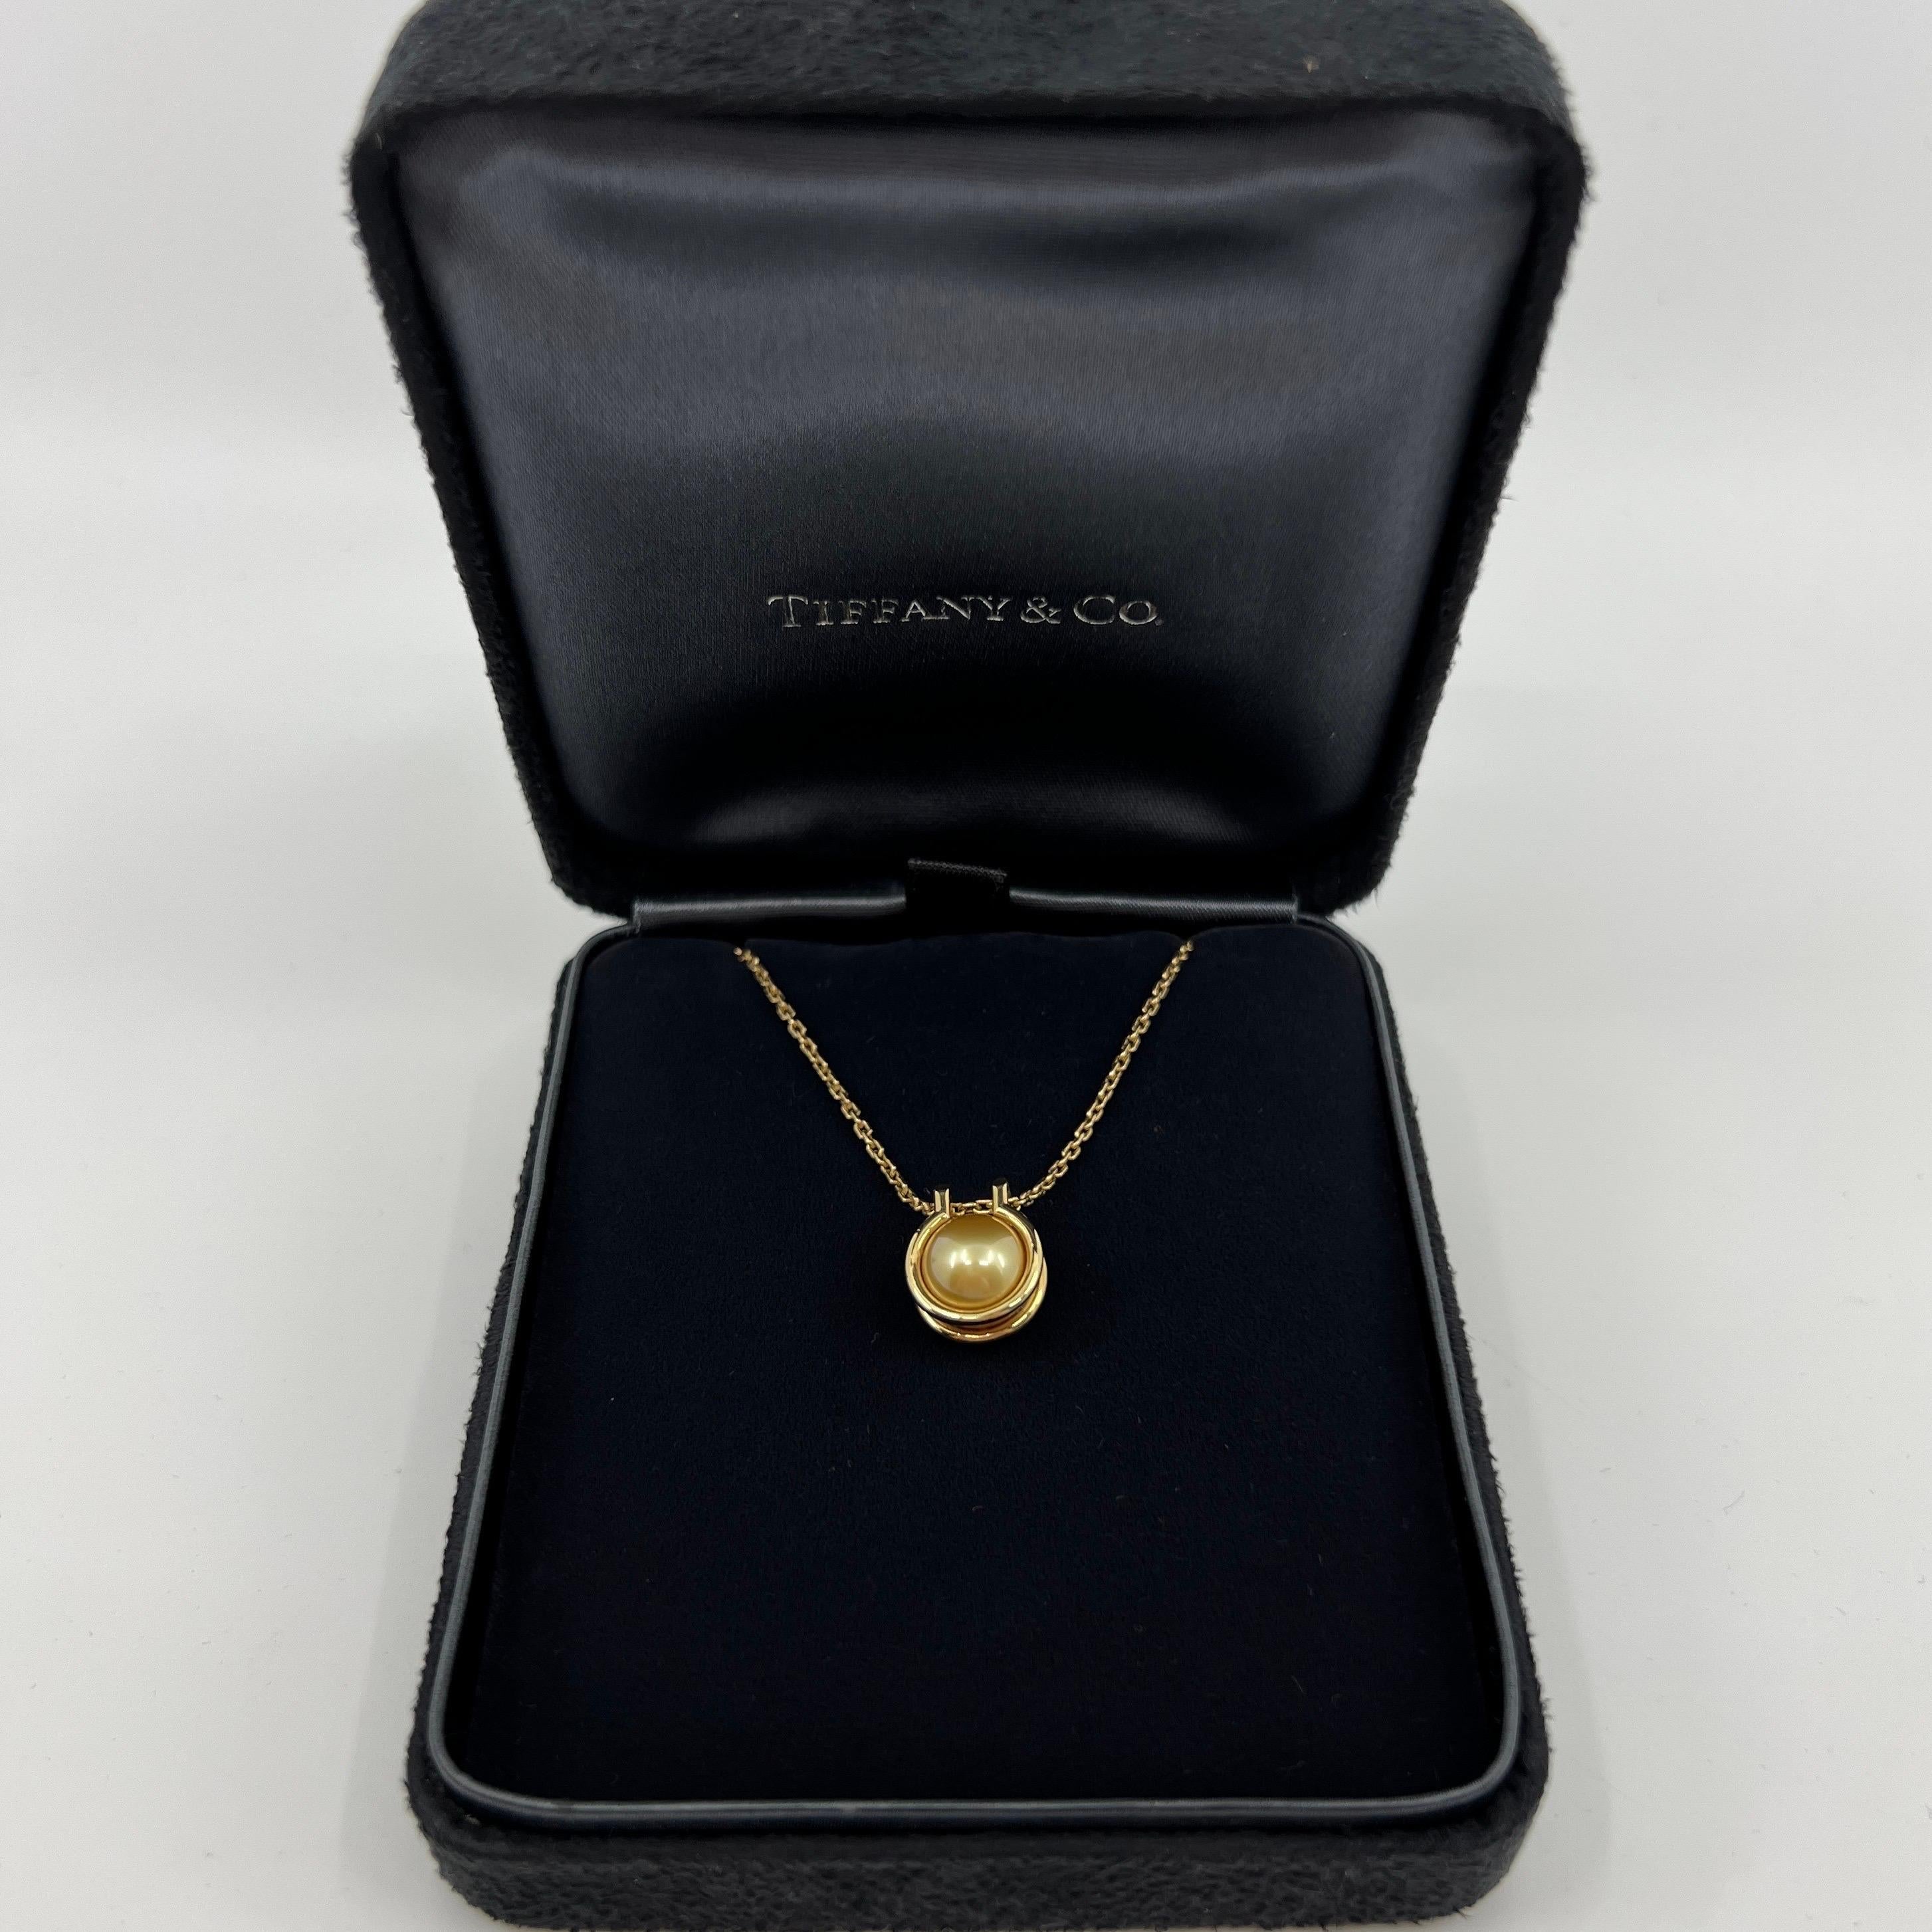 Rare Tiffany & Co Hardwear Golden Southsea Pearl 18k Yellow Gold Link Pendant Necklace.

Beautiful and rare golden southsea pearl link necklace from the Tiffany & Co Hardwear line.

Tiffany HardWear is elegantly subversive and captures the spirit of